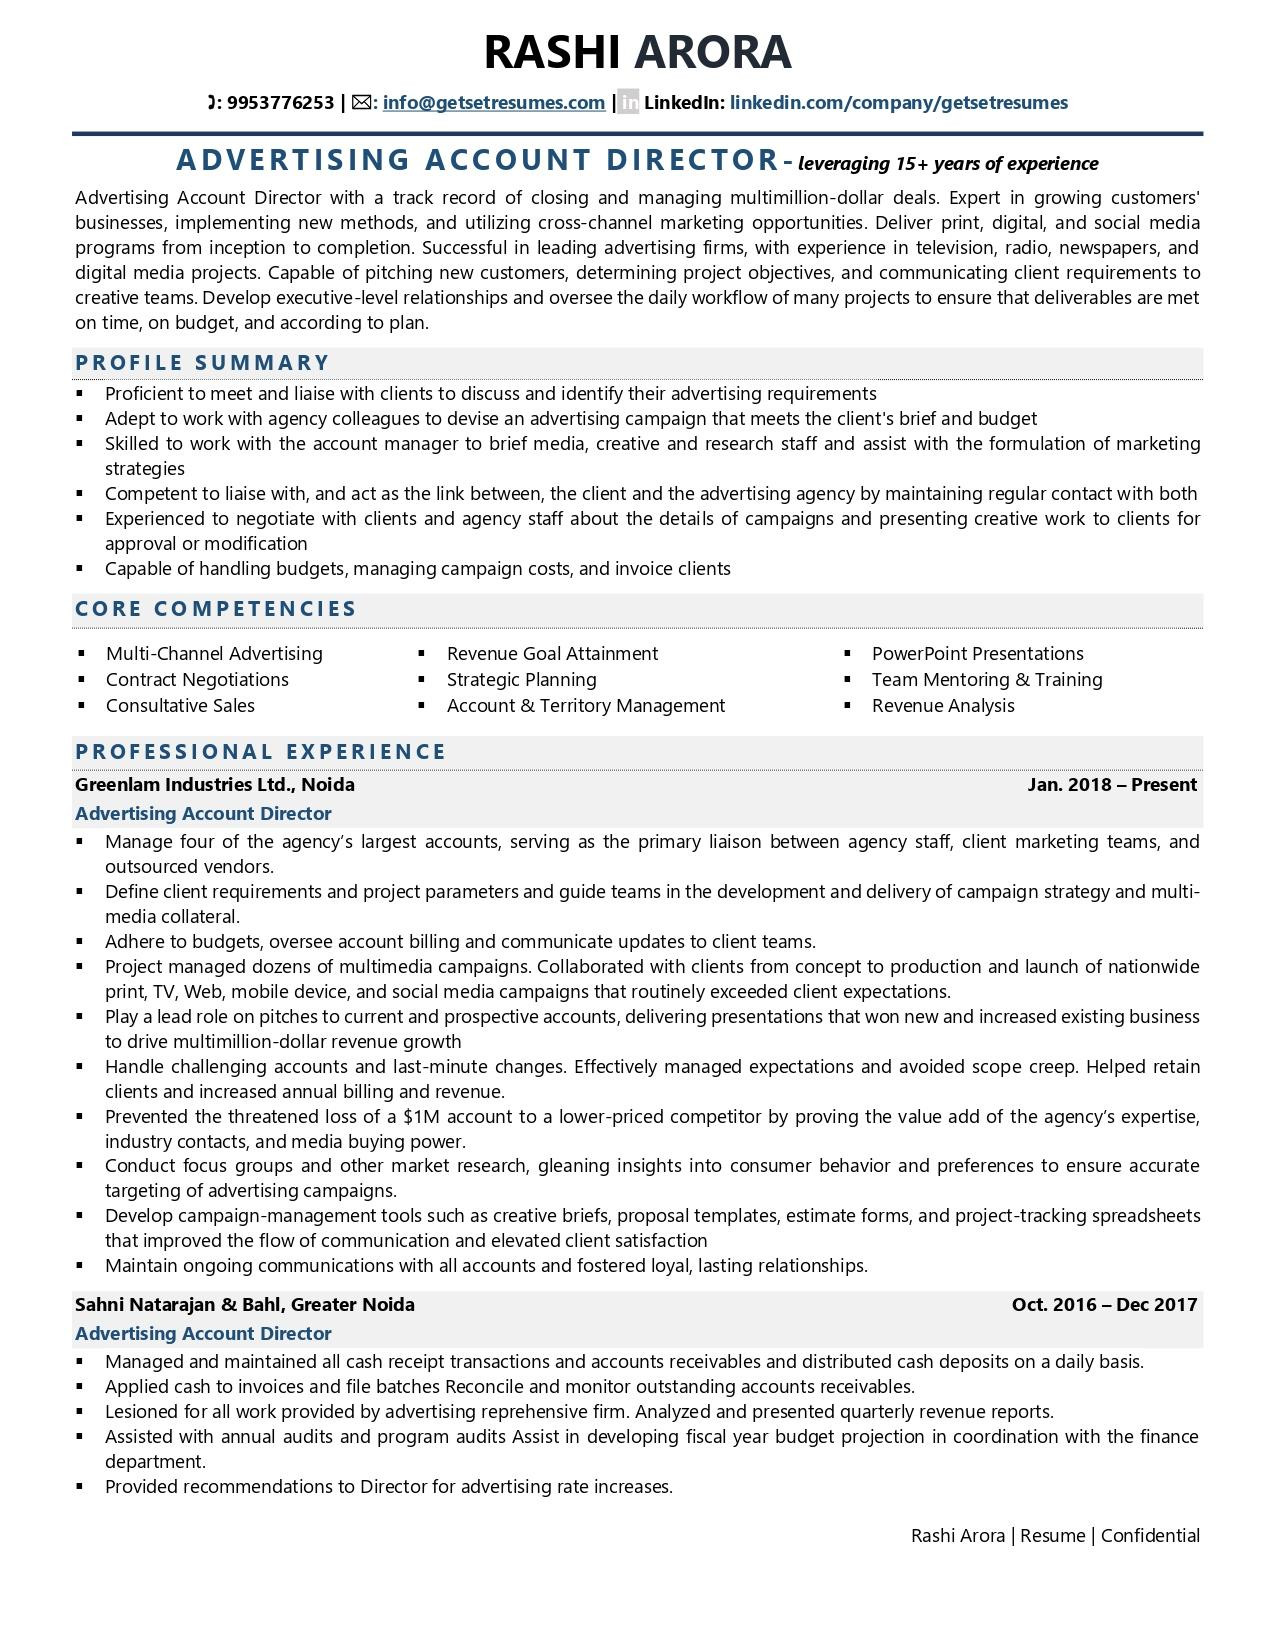 Advertising Agency Account Manager Resume Sample Account Director (advertising) Resume Examples & Template (with …